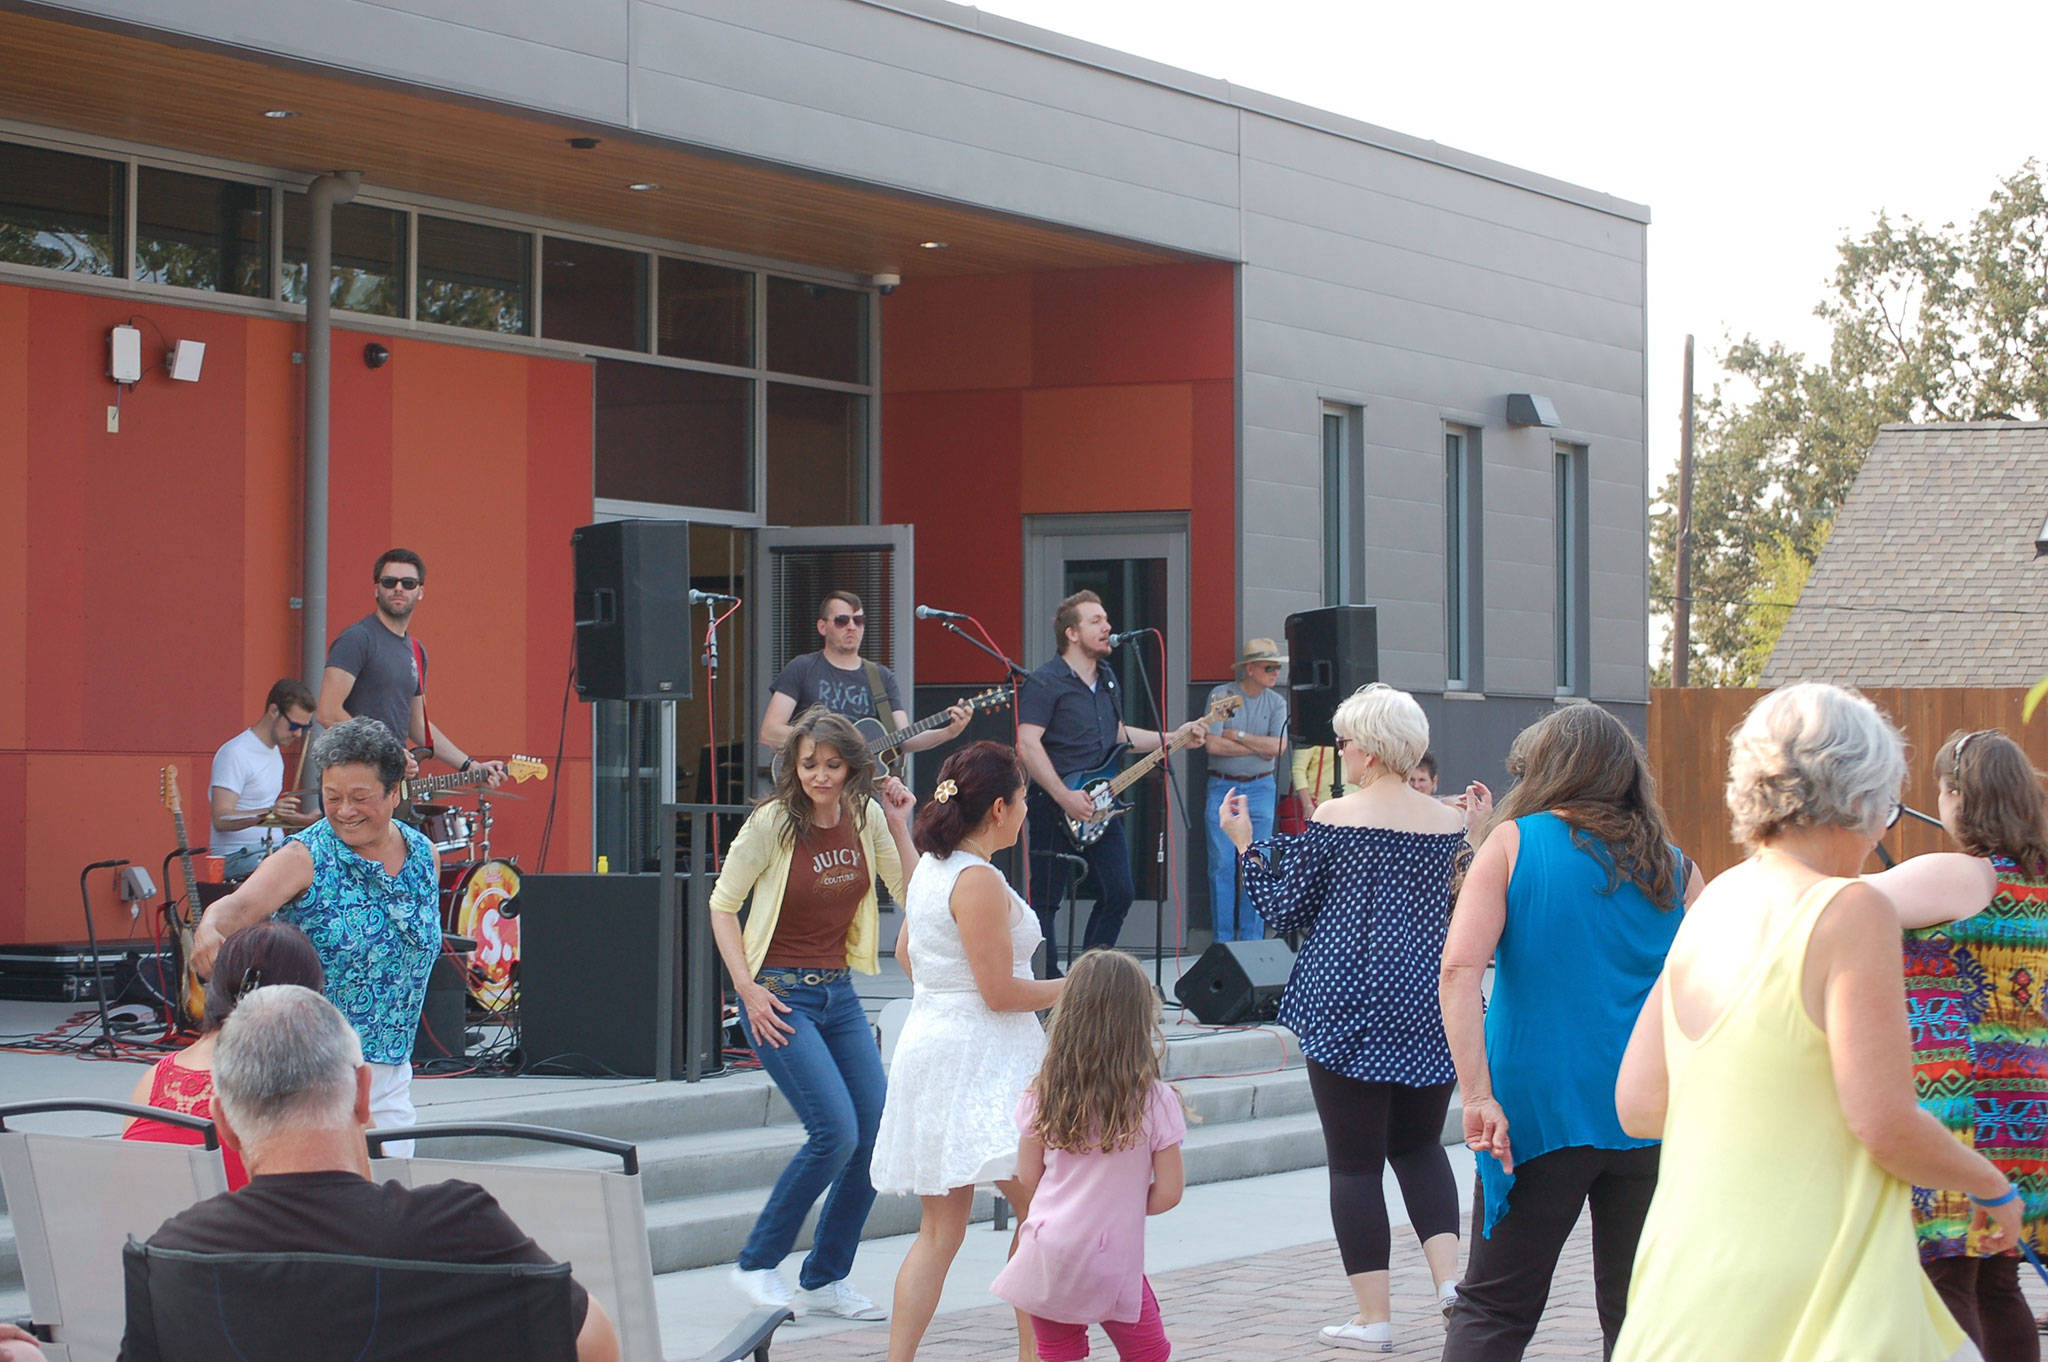 A group dances to live music from the Seattle-based band Shaggy Sweet at the Keying Around block party on Friday, Aug. 4. The event featured a painted piano auction, live music, food from Maggie Mays food truck and beverages from The Cedars at Dungeness. Sequim Gazette photos by Erin Hawkins